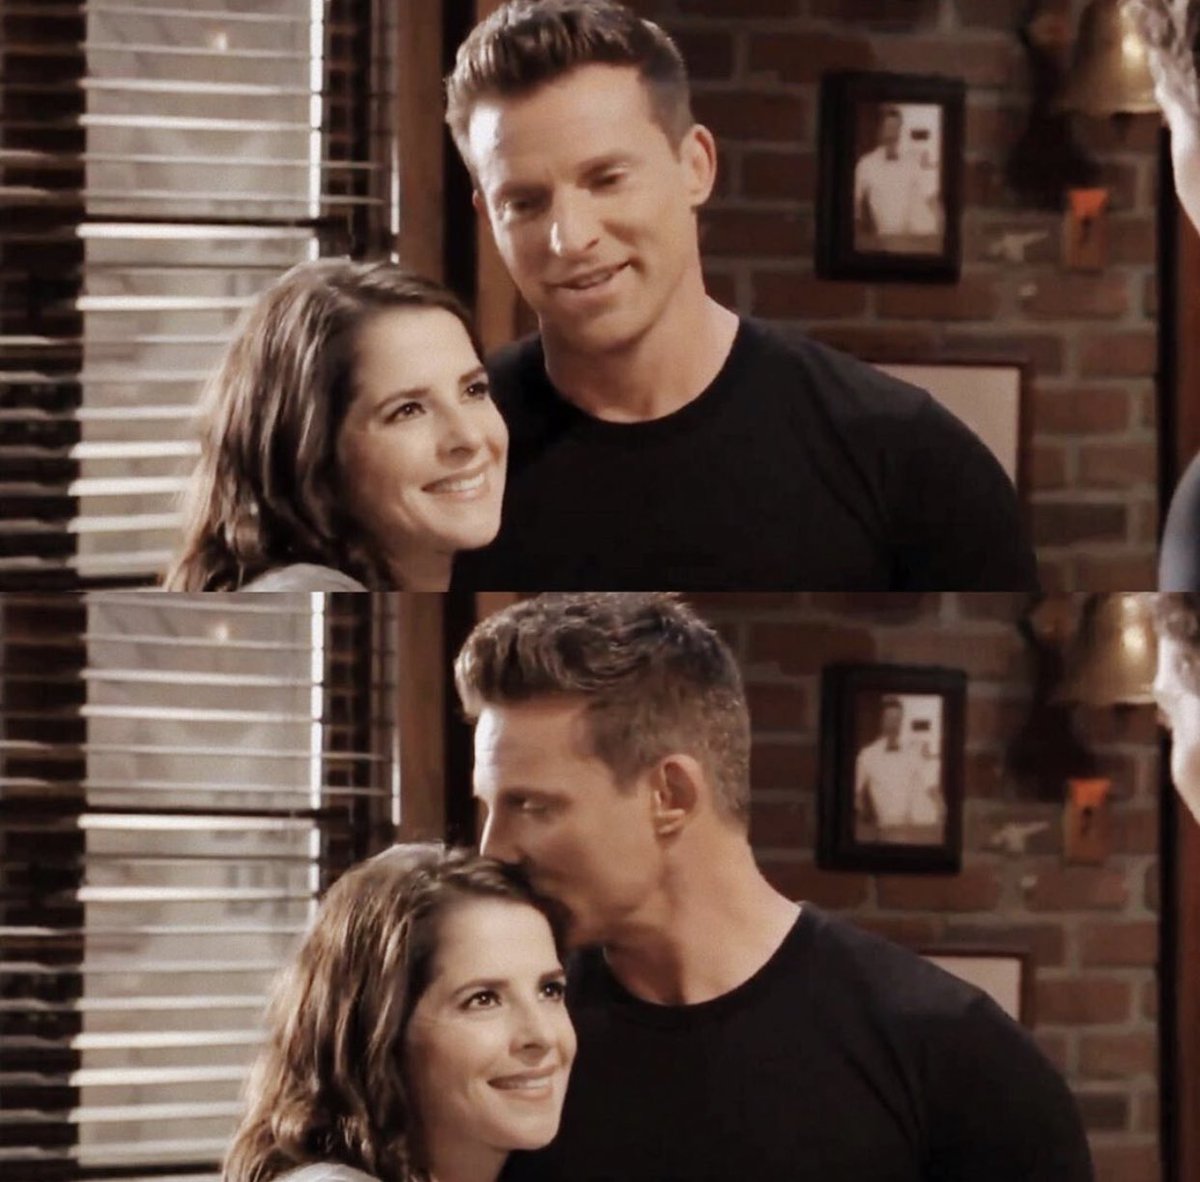 This was nice to see today...made me smile!  Didn’t excite me.. but it was a calming peace!  Like all was well with the world & then I continued my day. 🥰 #contentment #jasam #staytogether #letskeepitthatway #gh #PI #mobenforcer #whoknew 💙💗